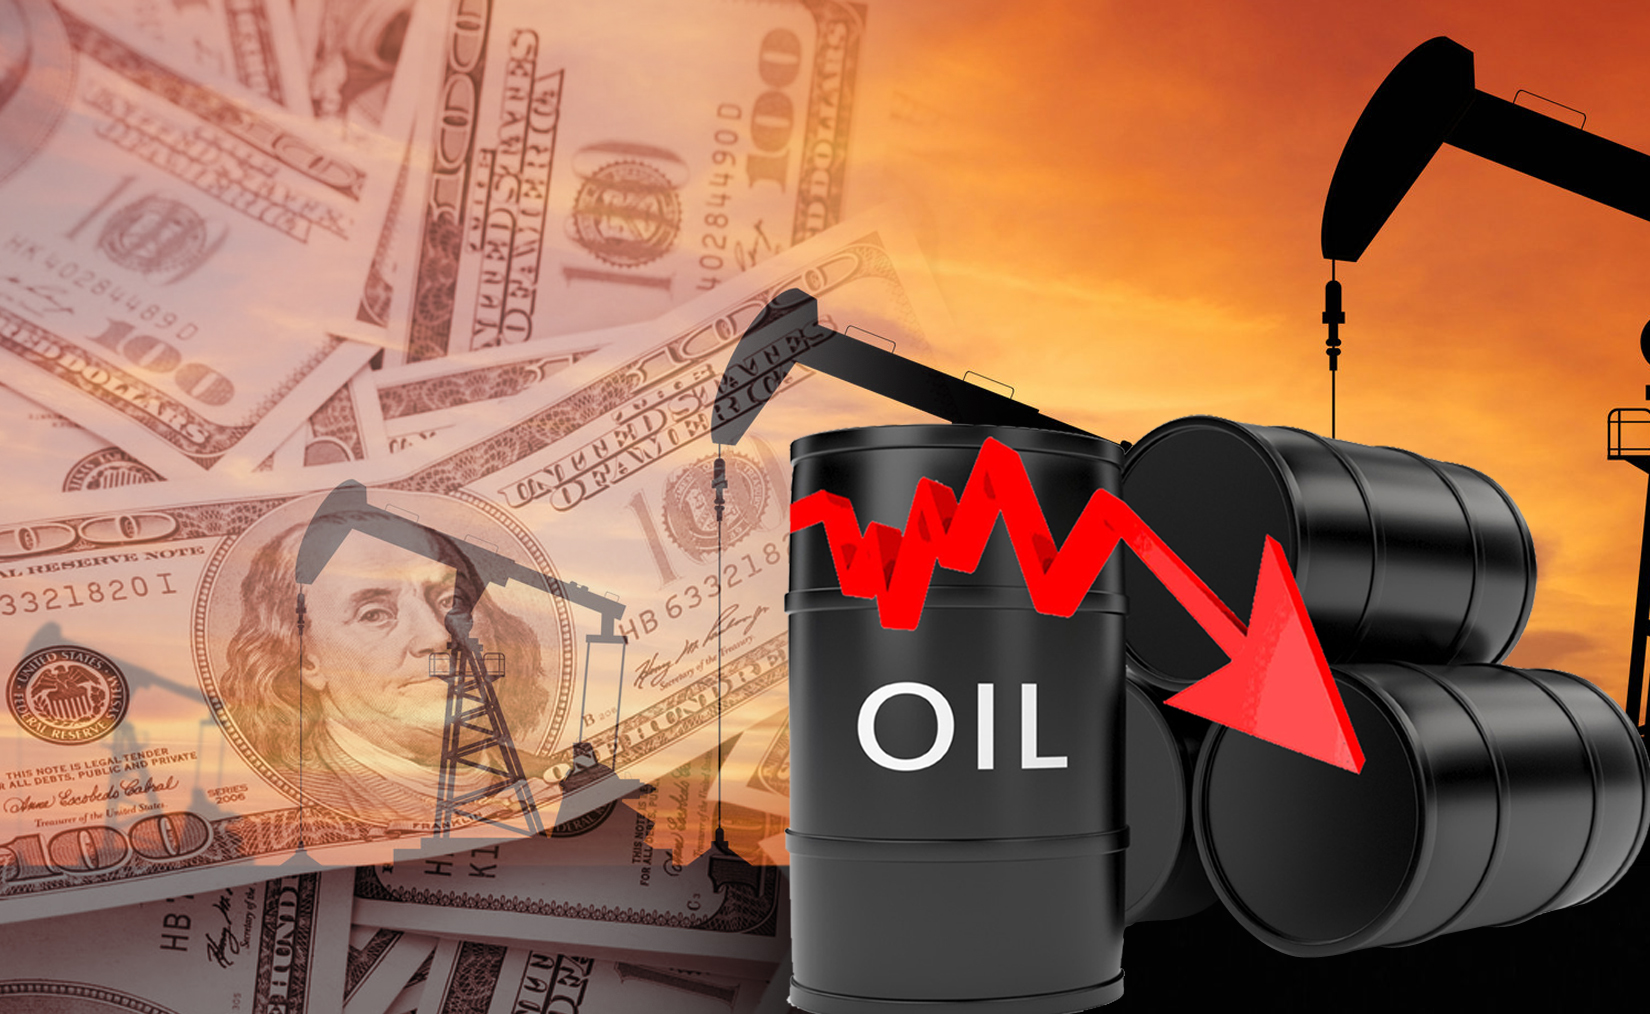 Kuwaiti oil price down 4 cents to stand at USD 59.84 per barrel                                                                                                                                                                                           